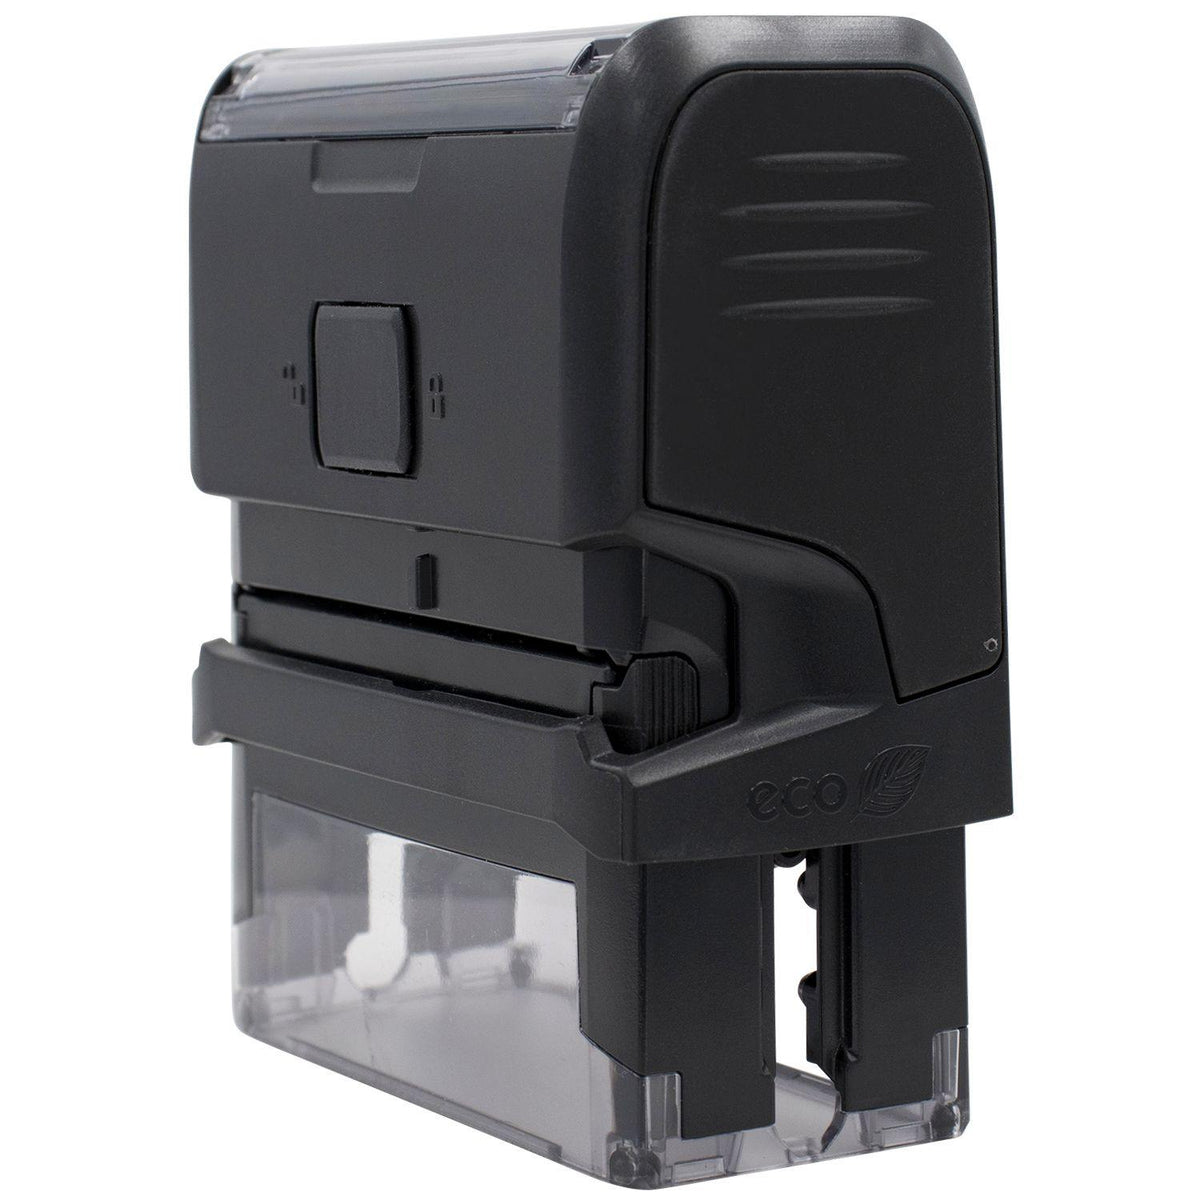 Self Inking Trust Dept Stamp - Engineer Seal Stamps - Brand_Trodat, Impression Size_Small, Stamp Type_Self-Inking Stamp, Type of Use_Finance